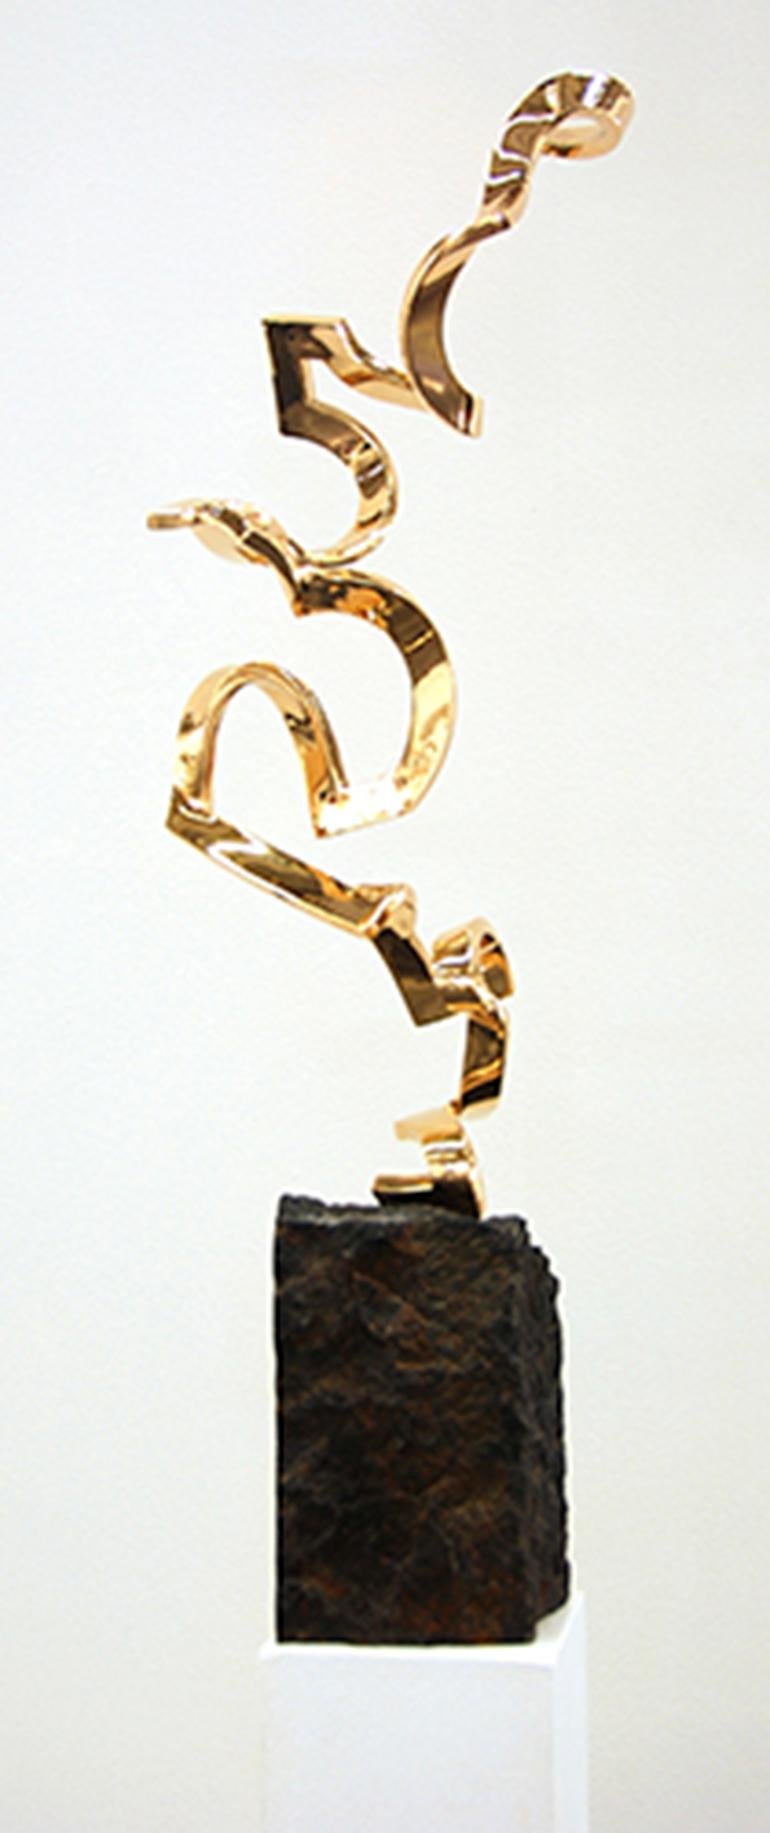 Light as Air by Kuno Vollet - Gold polished Bronze Sculpture on Granite Base 8